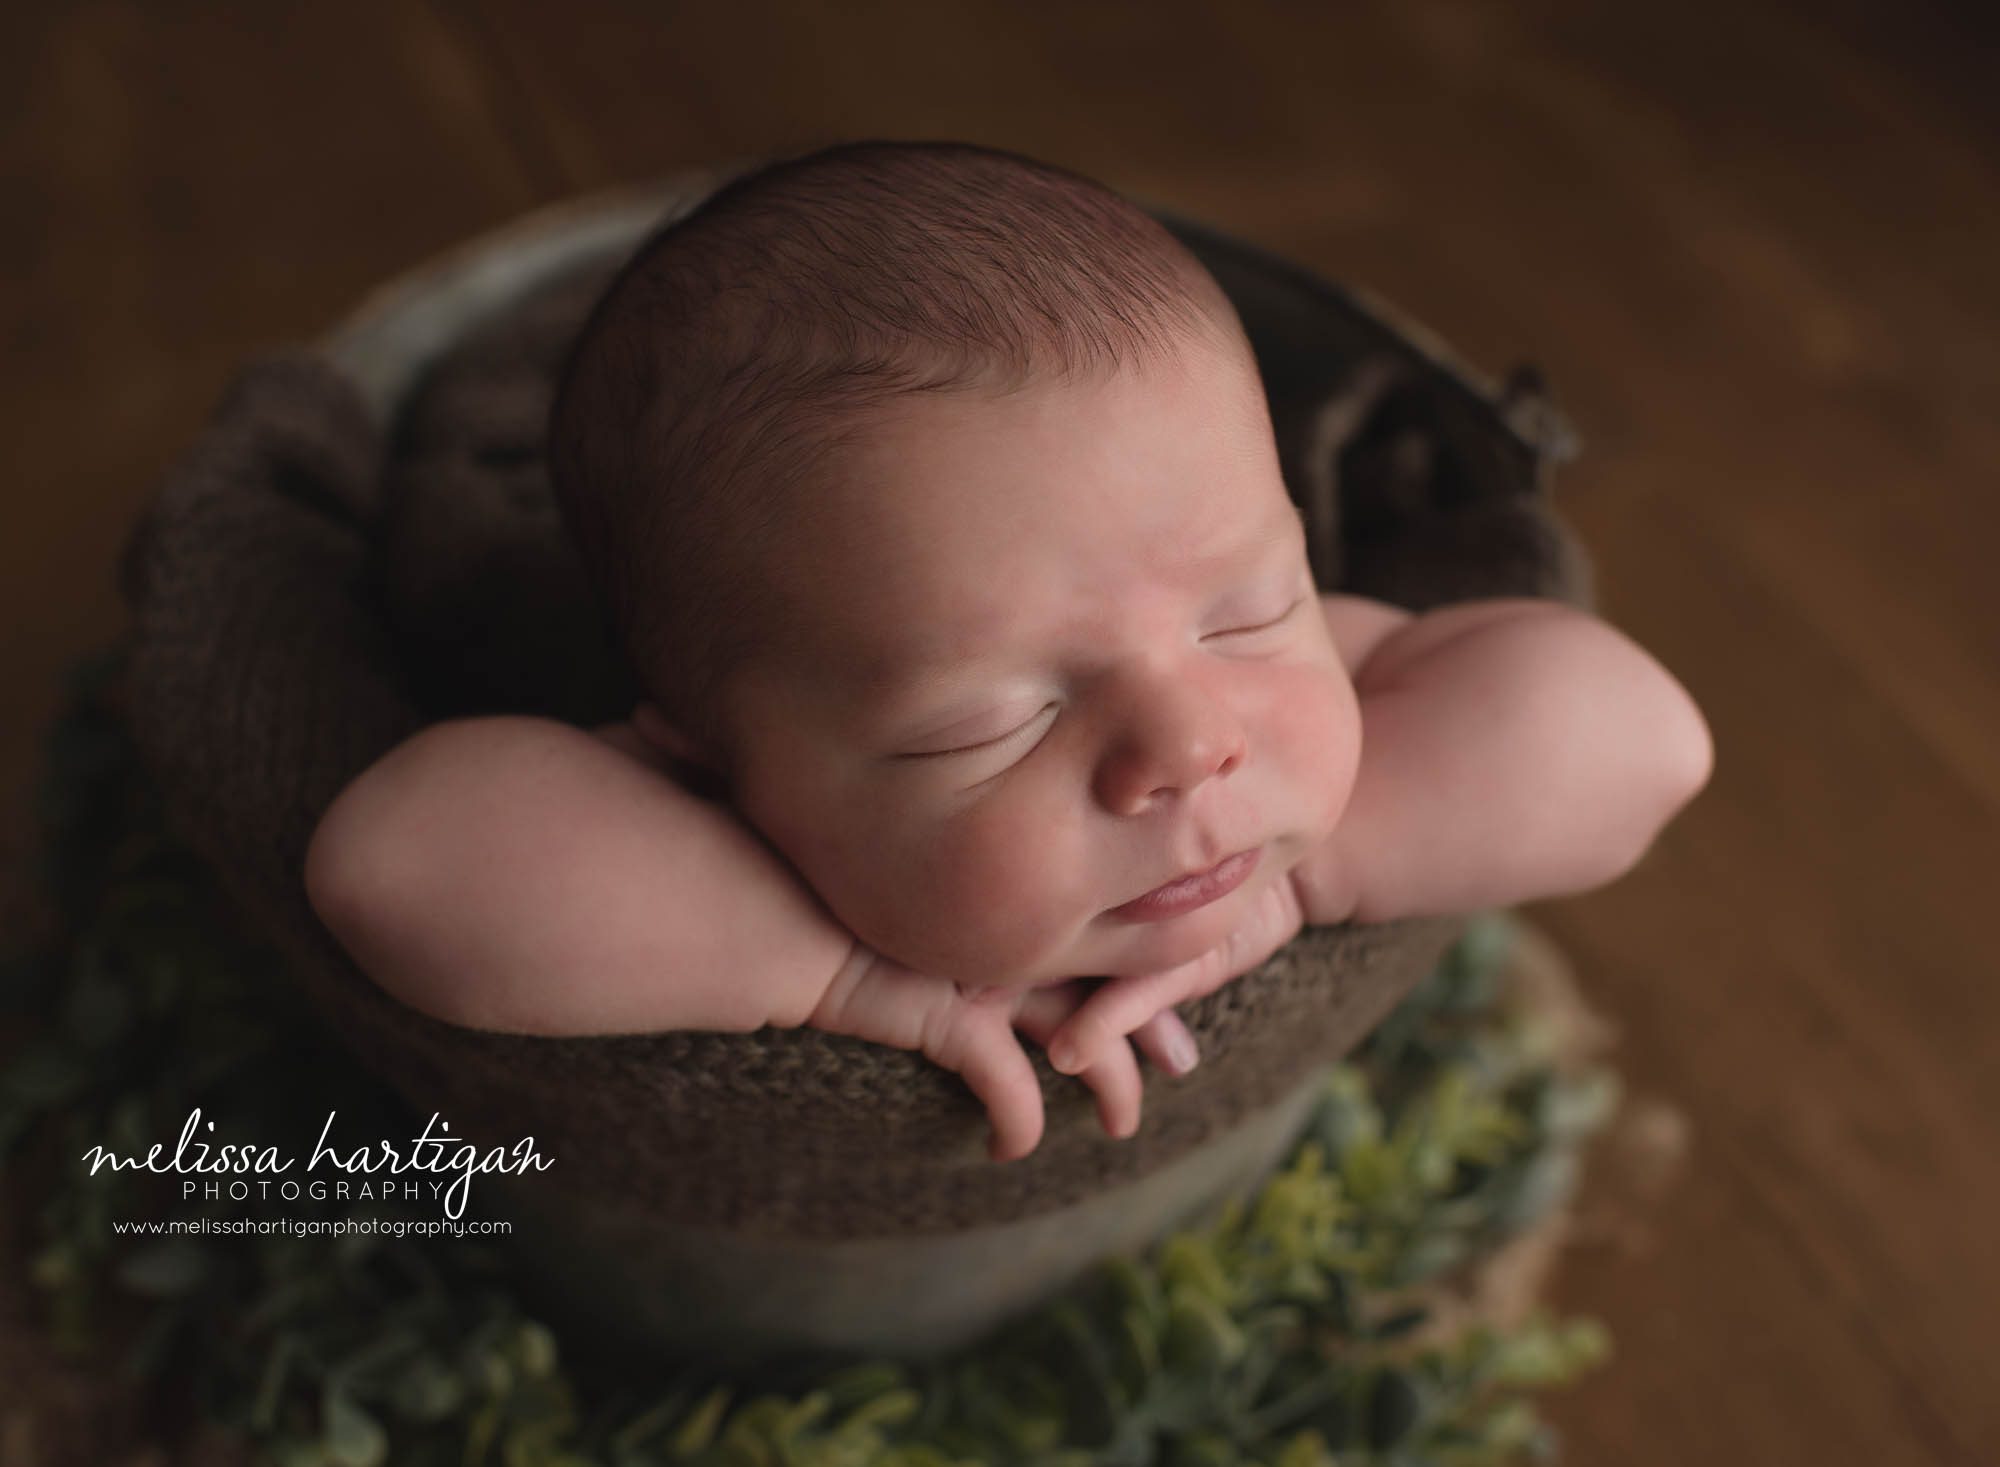 newborn baby boy posed in bucket captured from the side sleeping peacefully